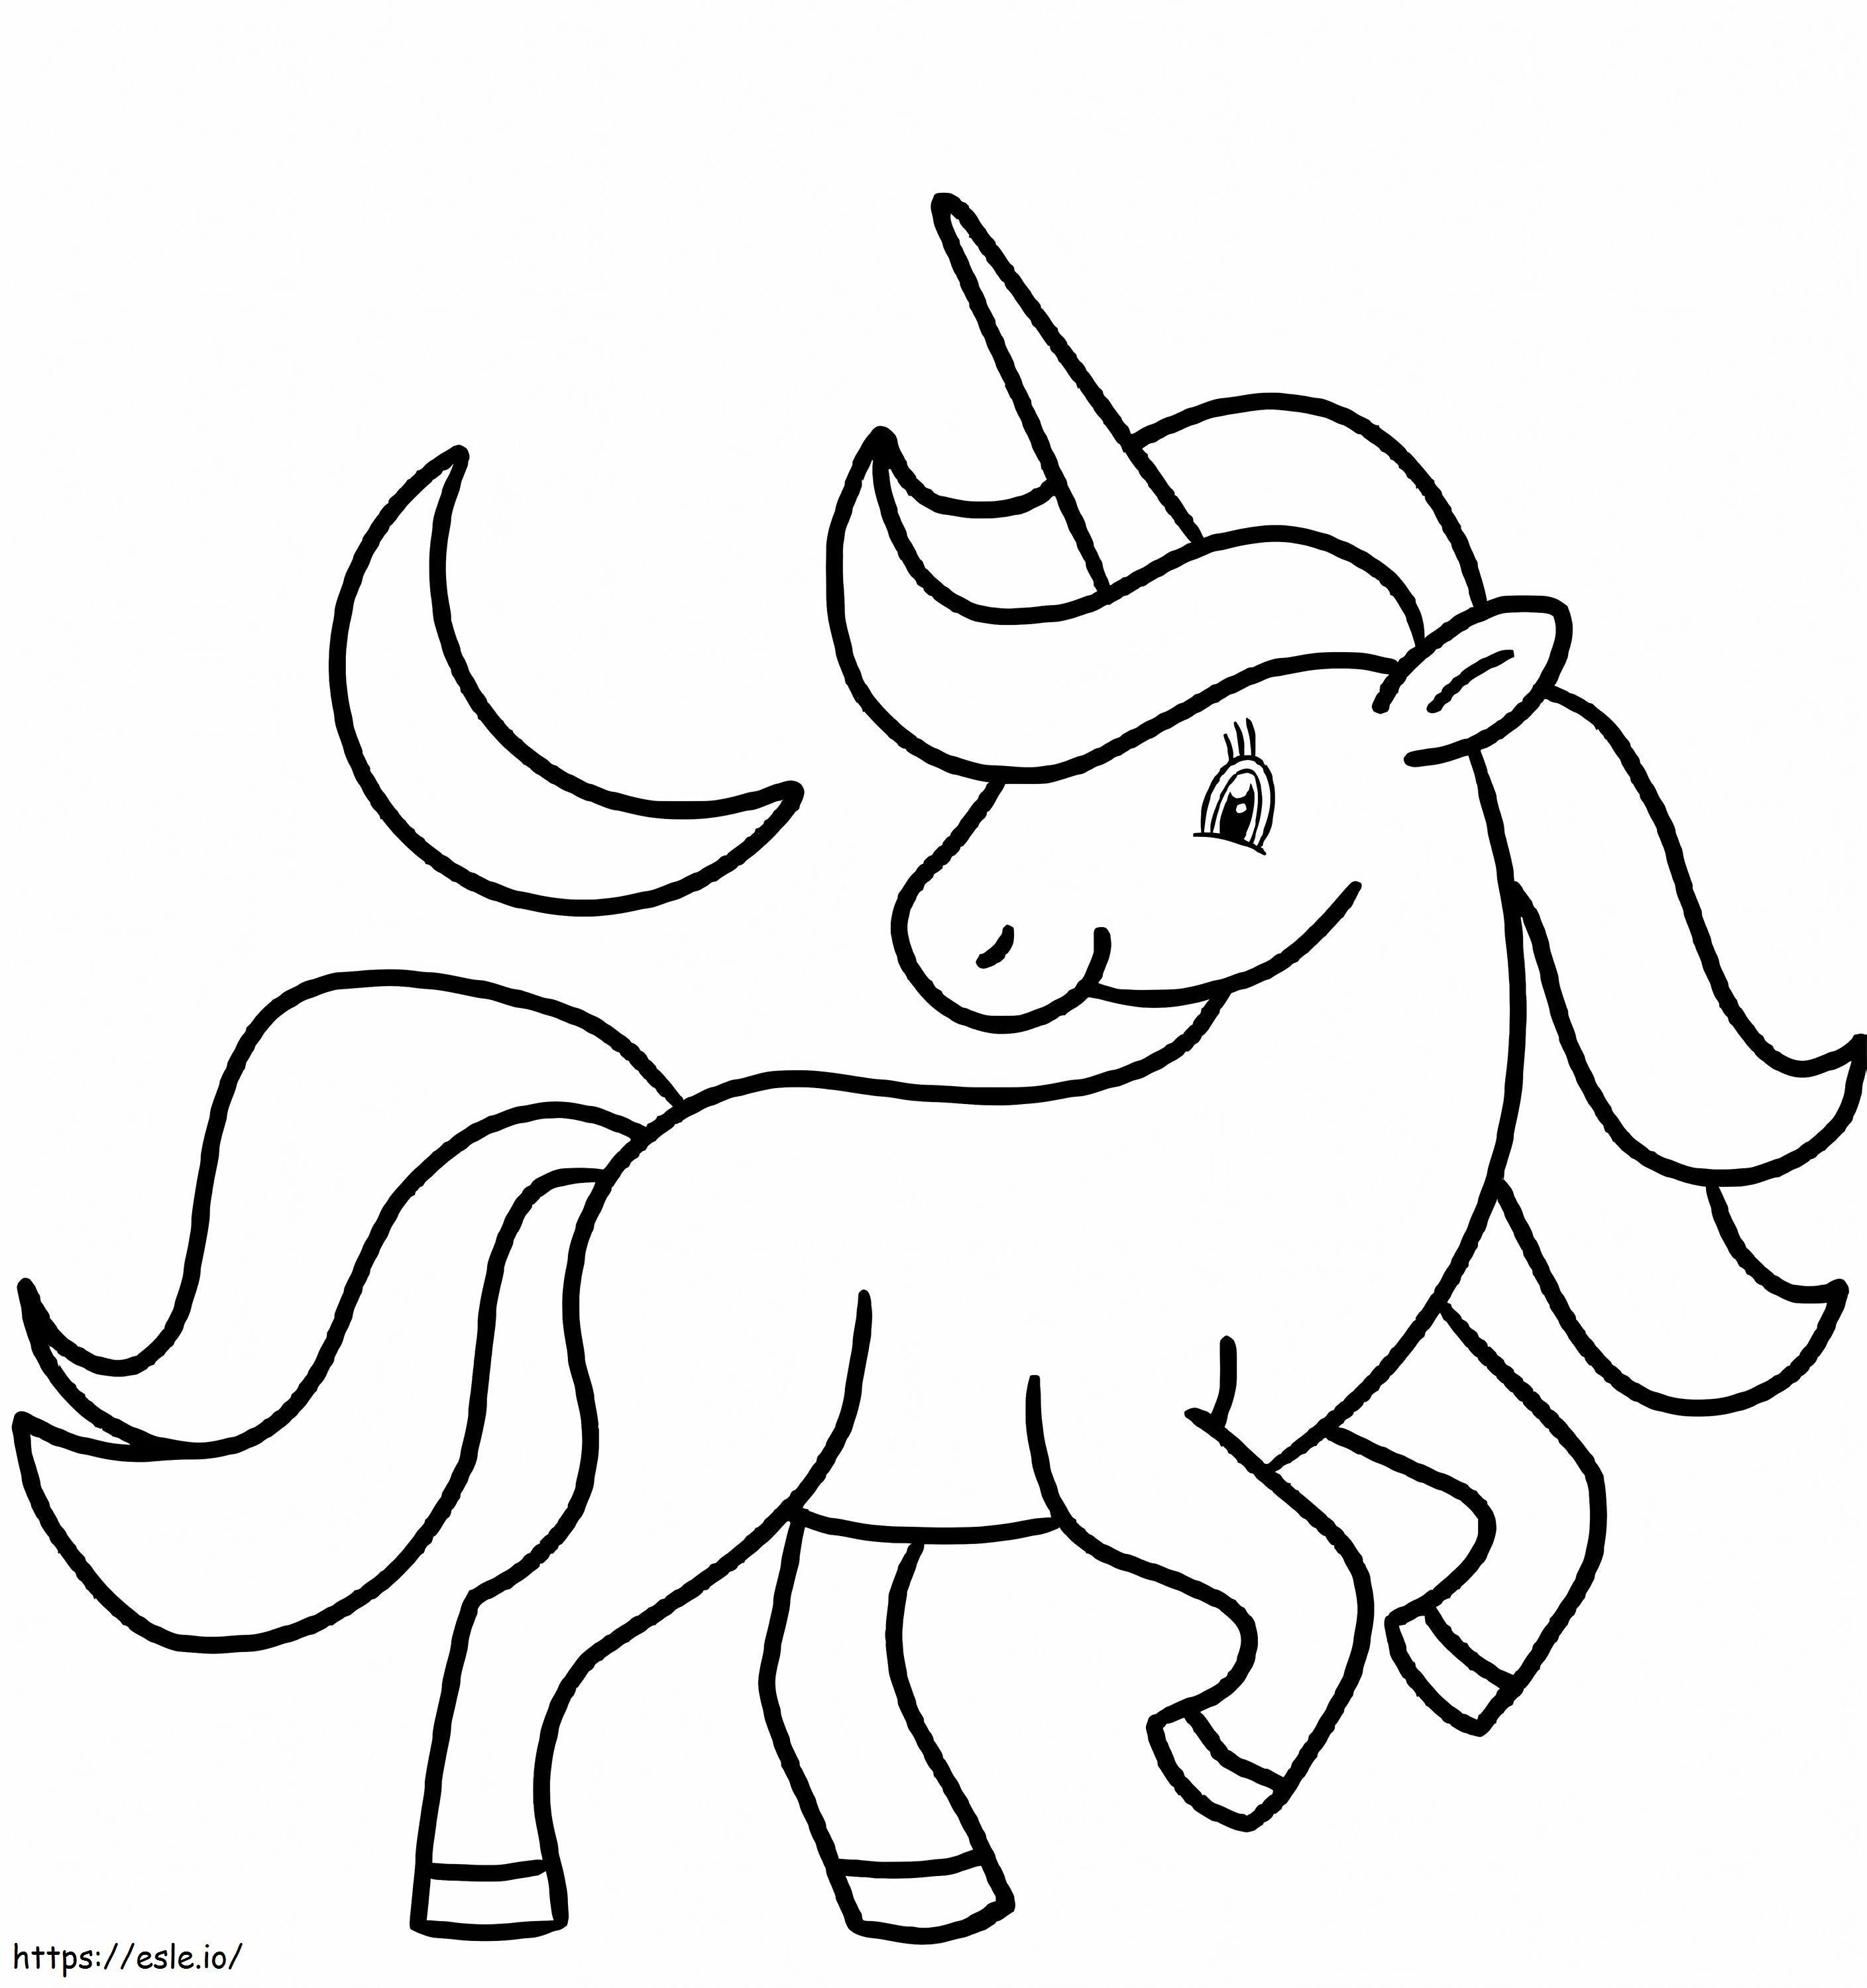 Unicorn And Moon coloring page